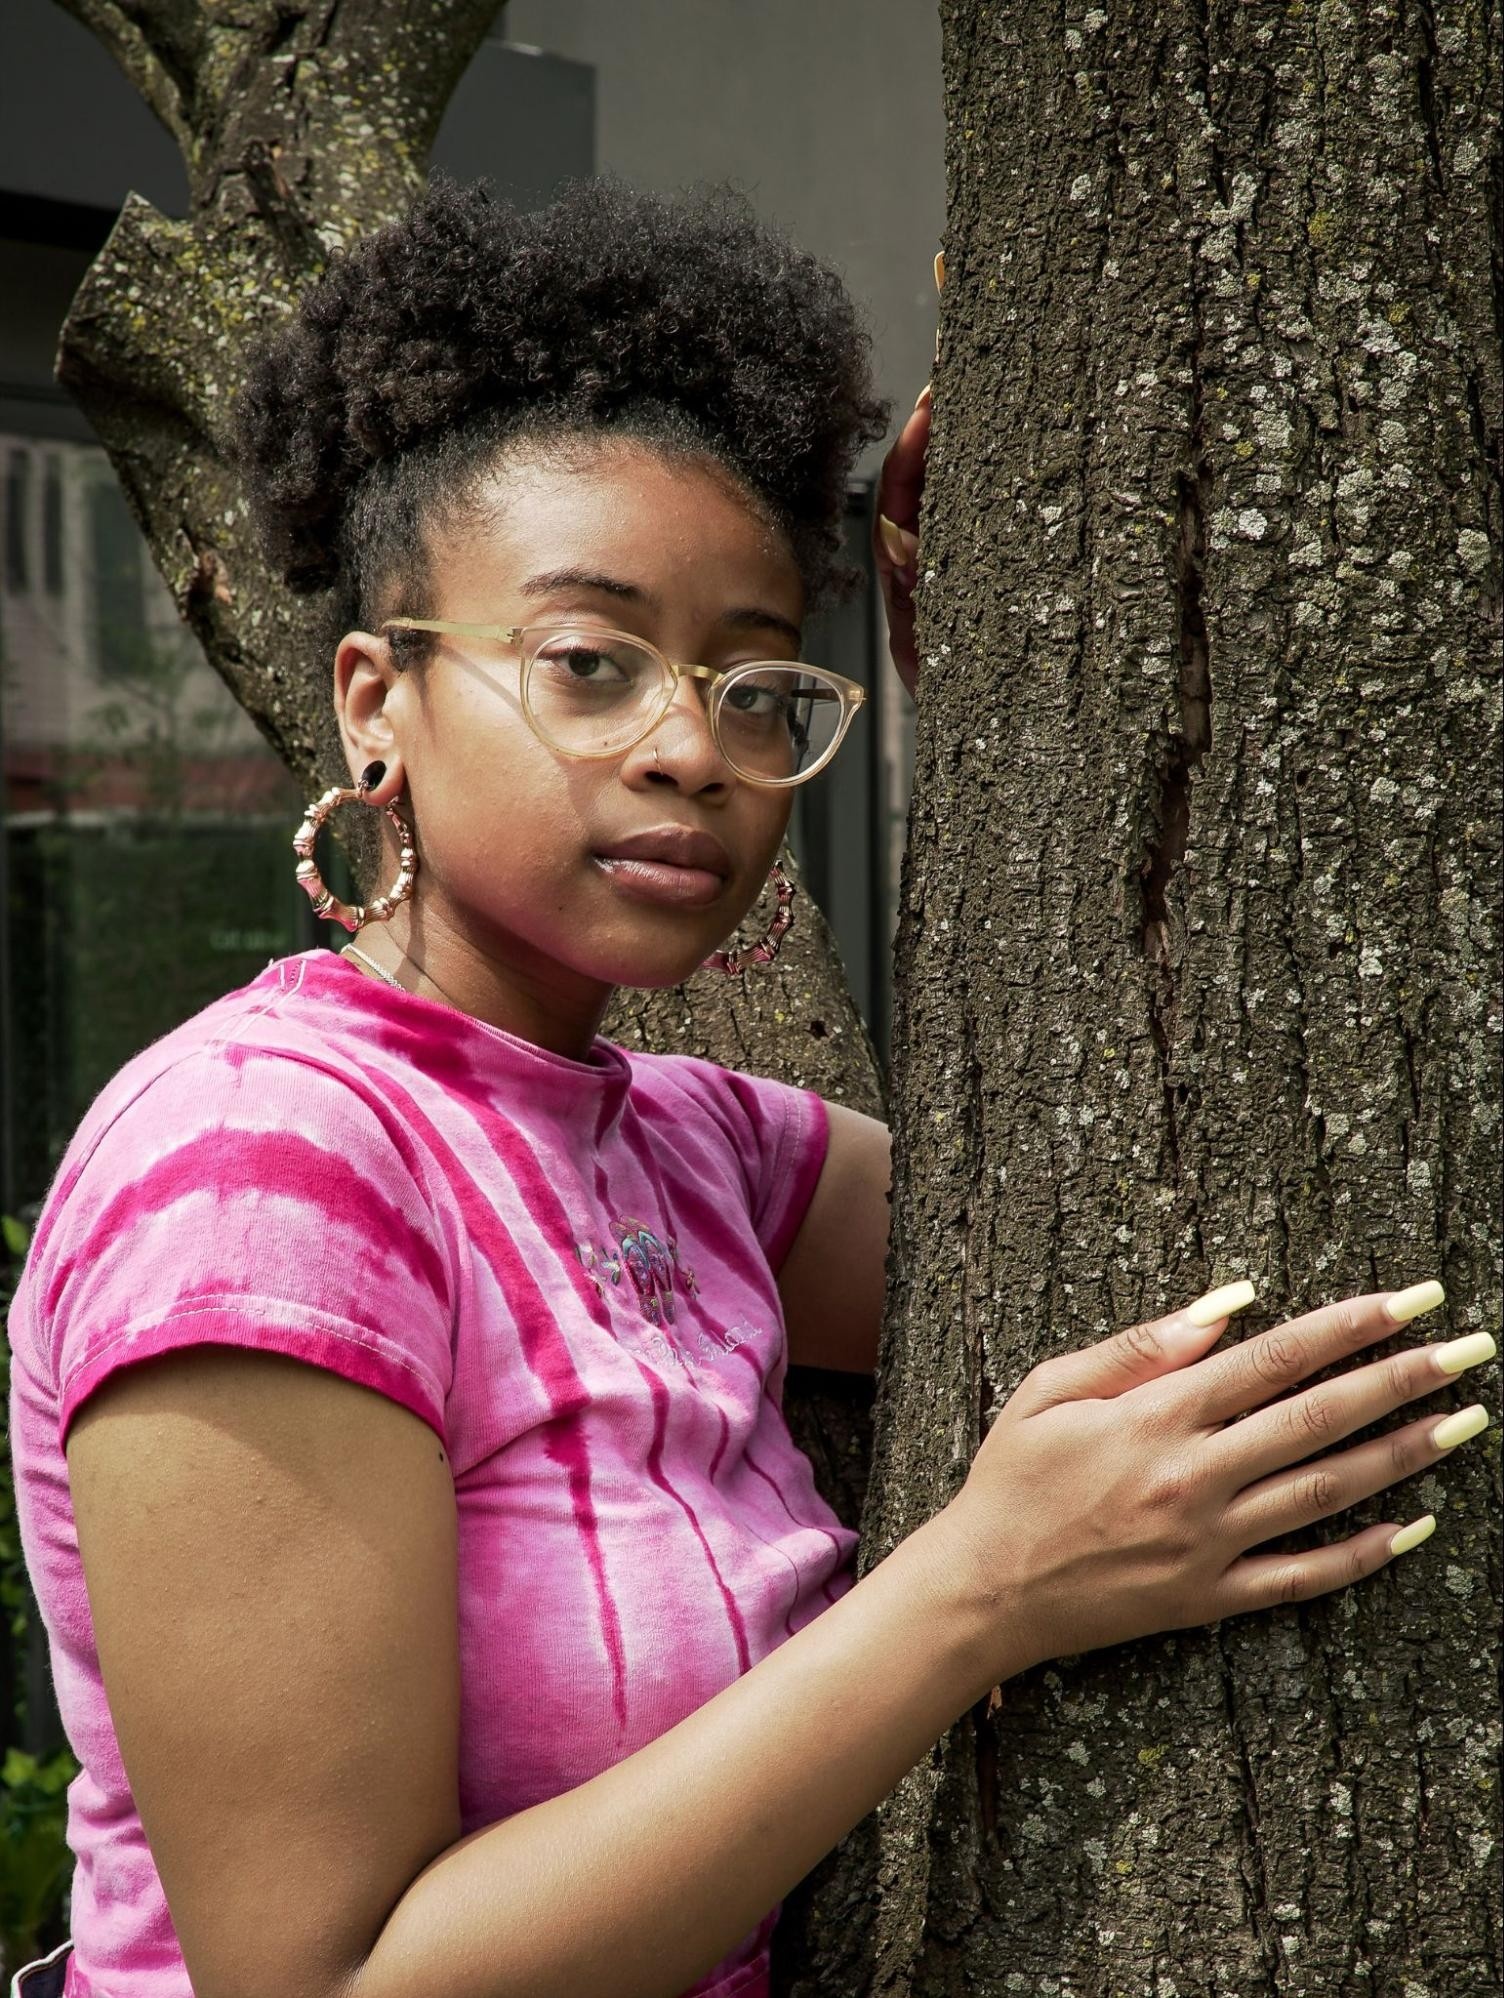 A Black person in a pink t-shirt and glasses leans against a tree trunk and looks at the camera